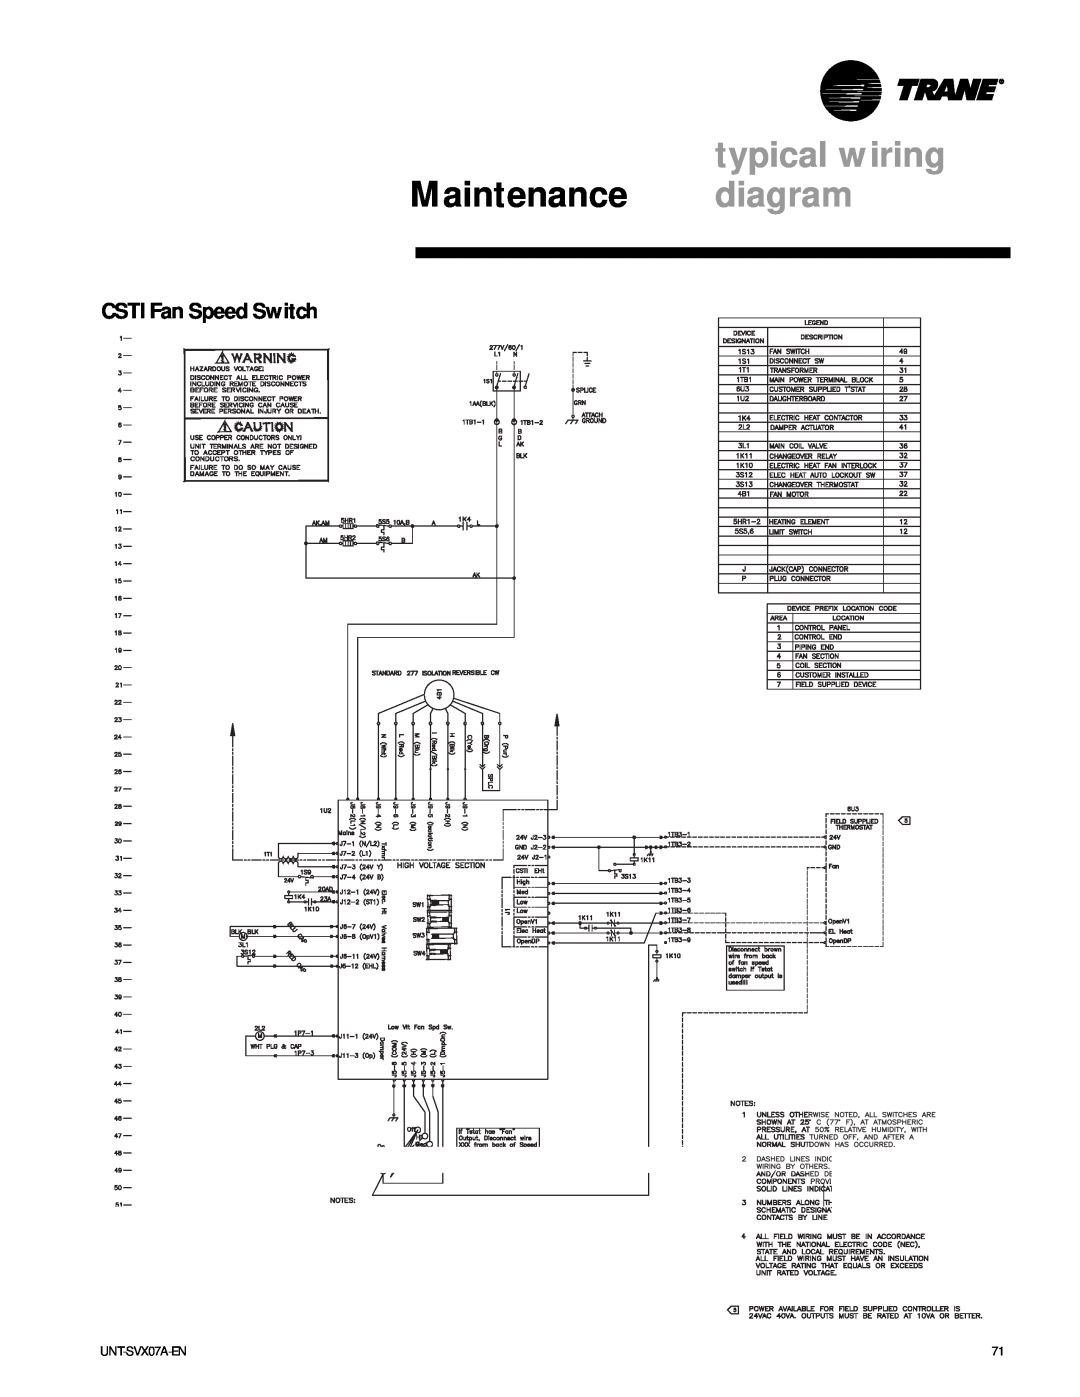 Trane UniTrane Fan-Coil & Force Flo Air Conditioners manual typical wiring, Maintenance diagram, CSTI Fan Speed Switch 